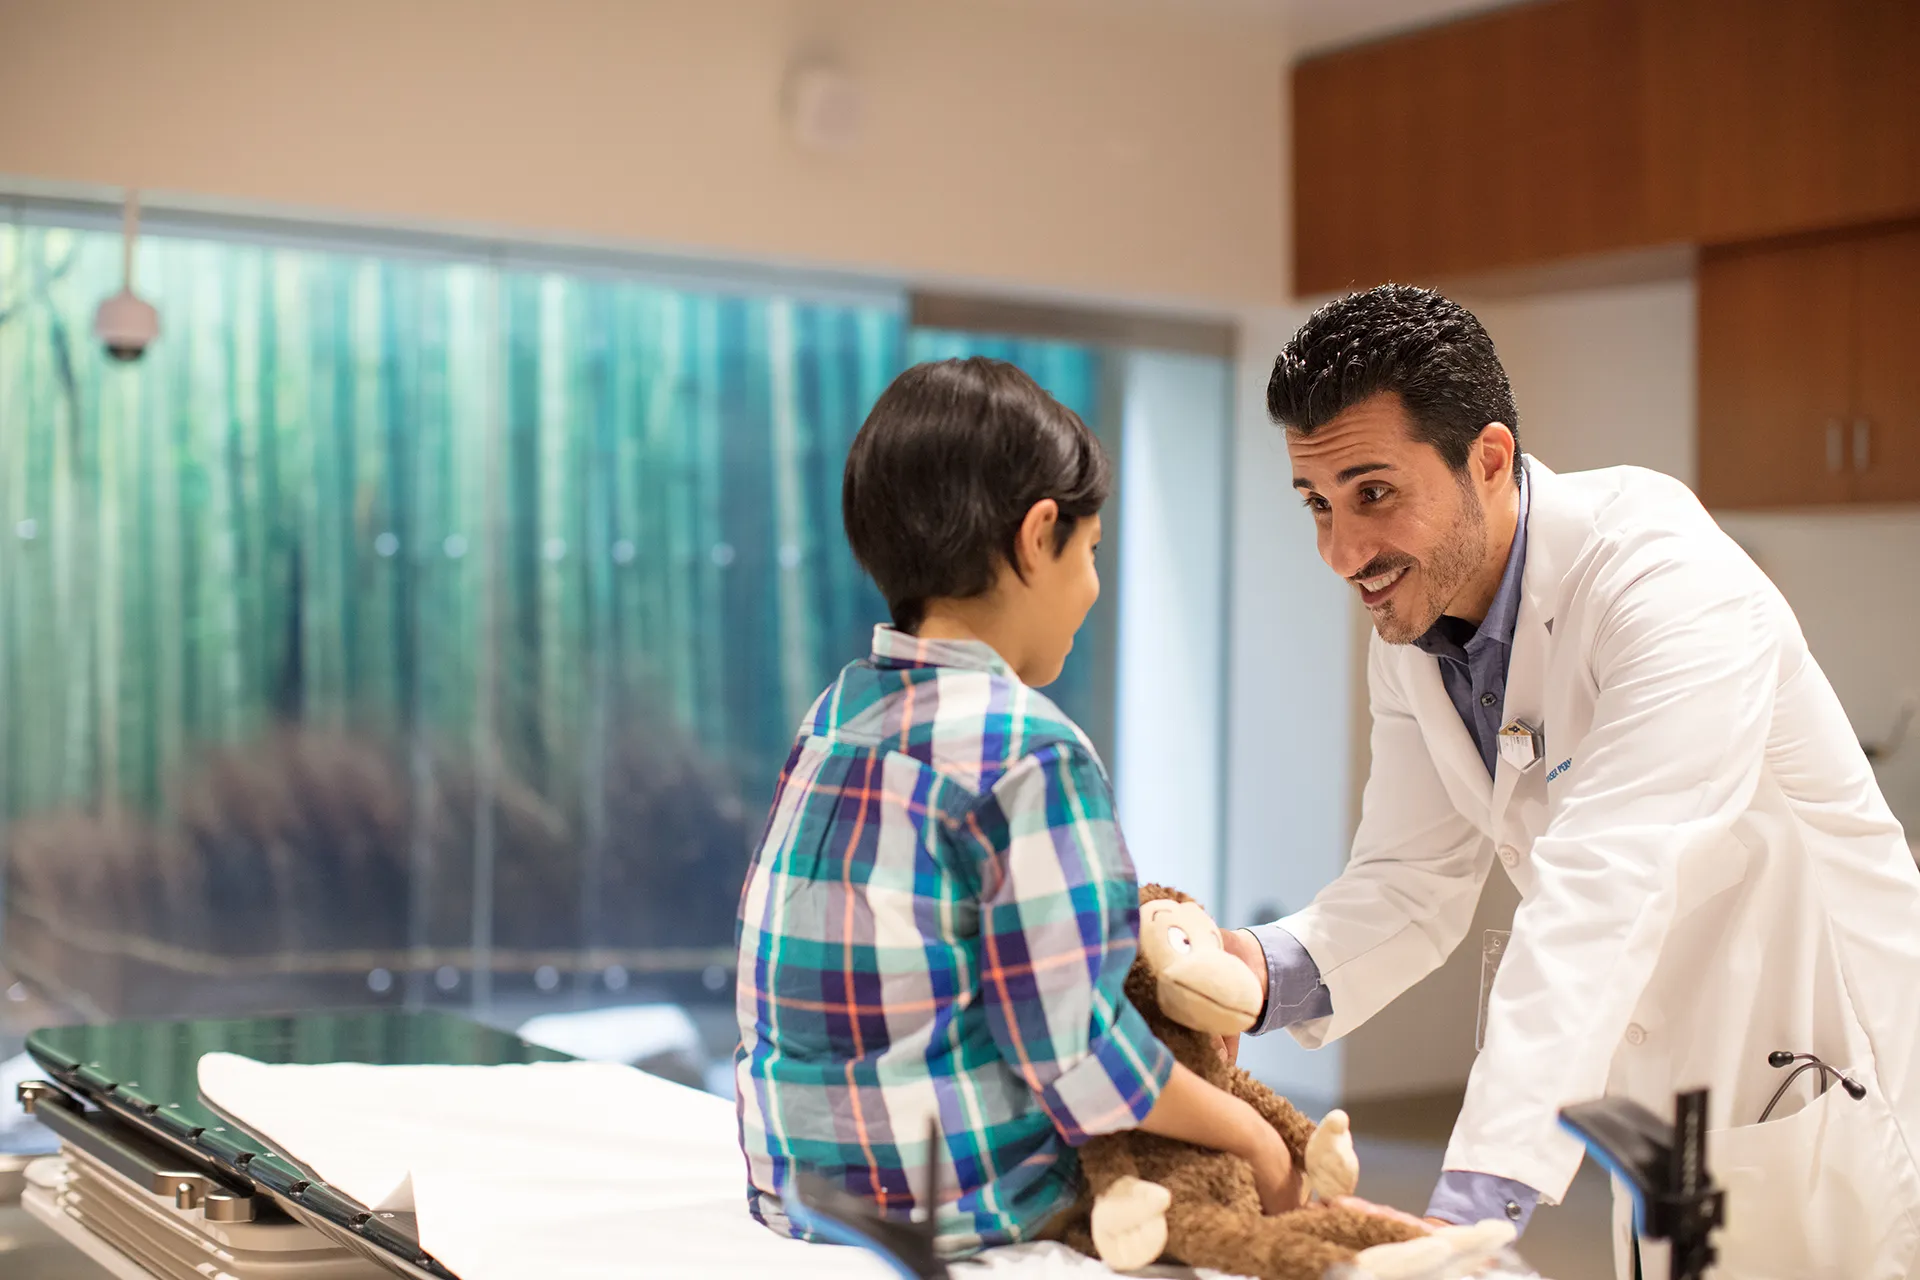 Kaiser Permanente physician with pediatric patient